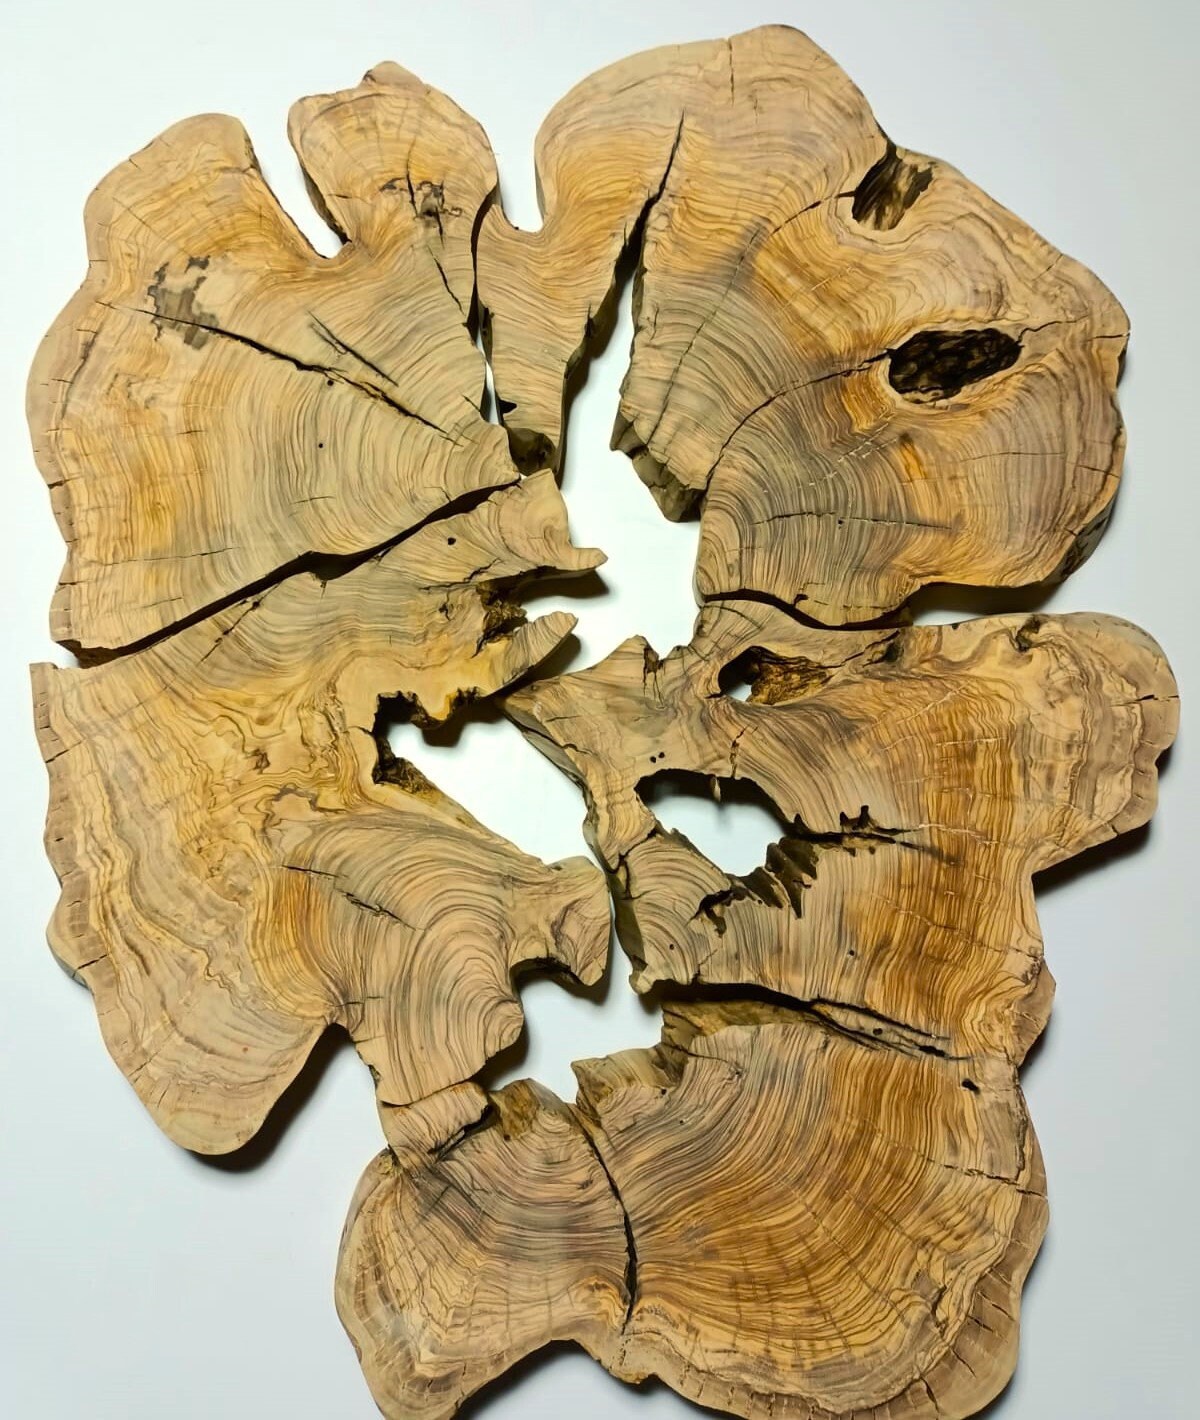 Five Kiln Dried 9 to 10 diameter x 1 thick Wood Slices, Wood Rounds, Wood  Slabs, Tree Slices, Wedding centerpieces, Woodland decor.